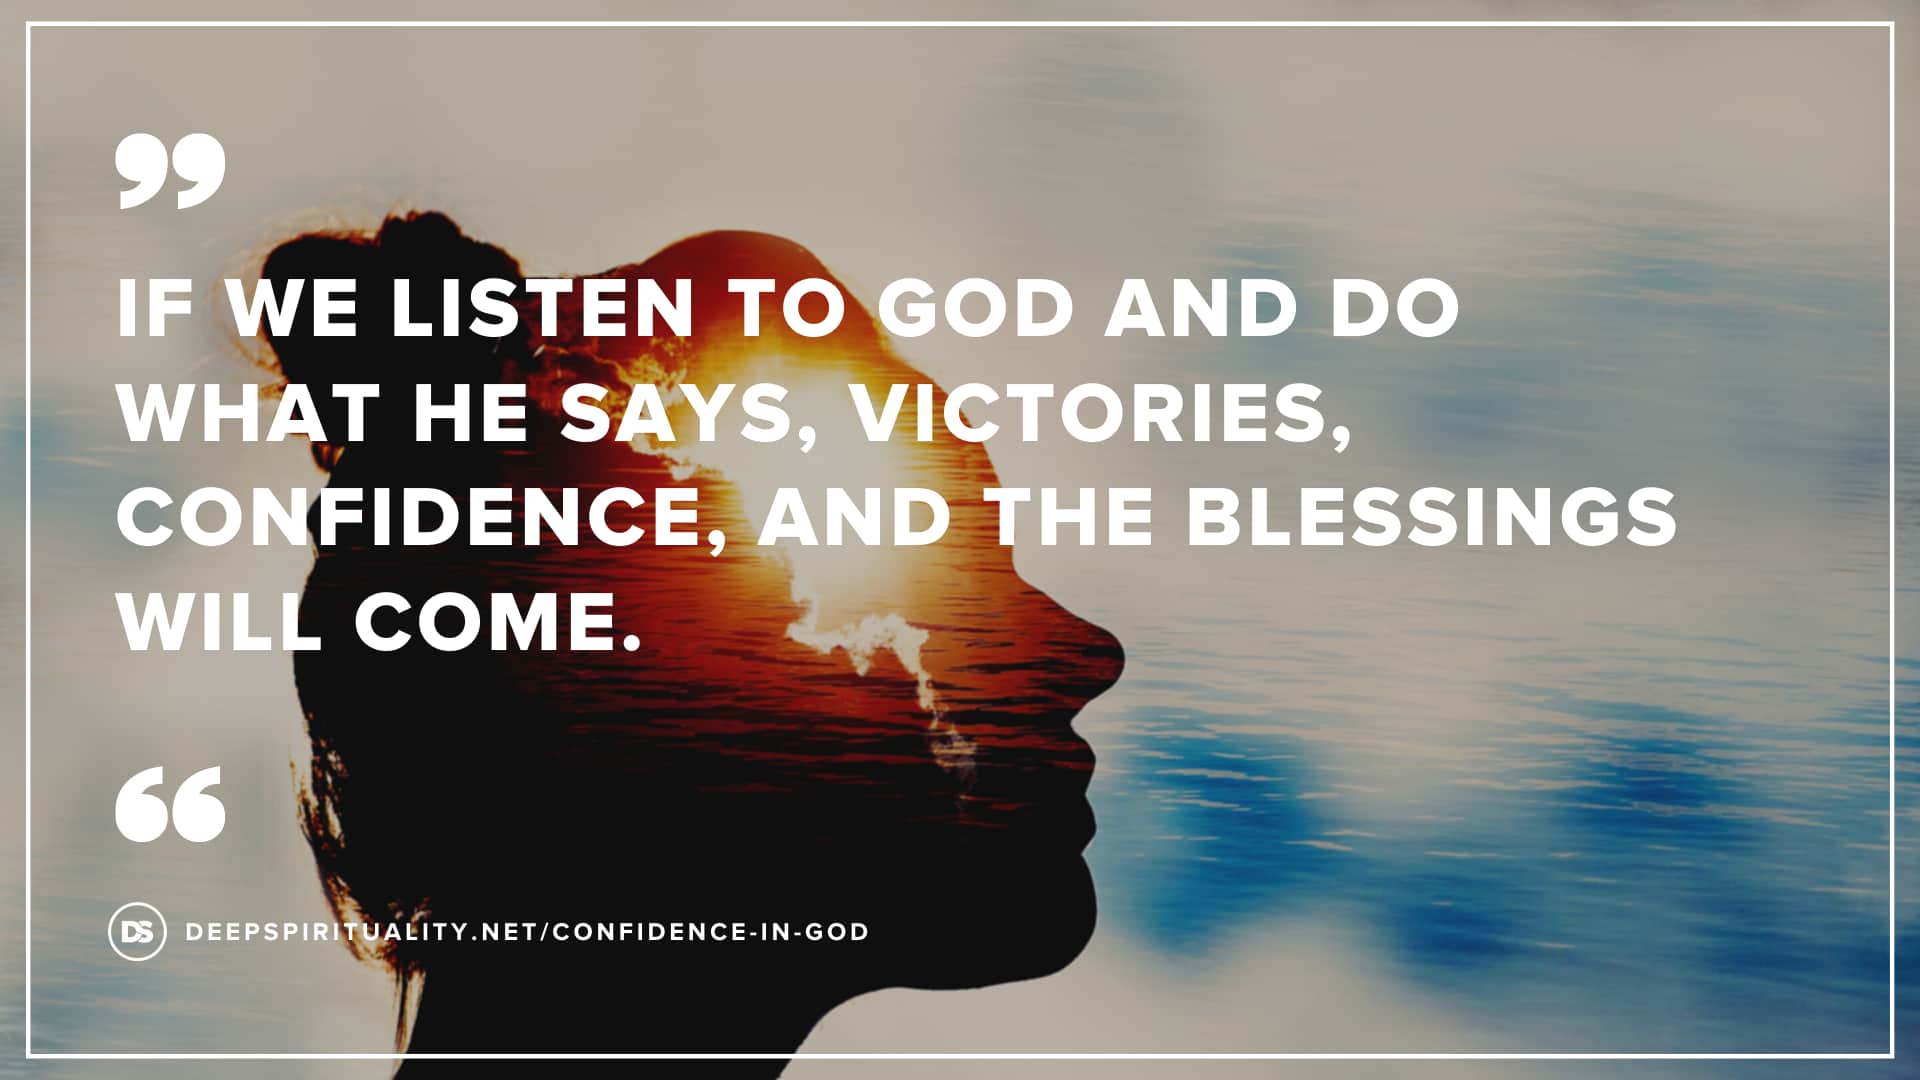 Listening to what God is telling us brings victories, confidence in God, and blessings.